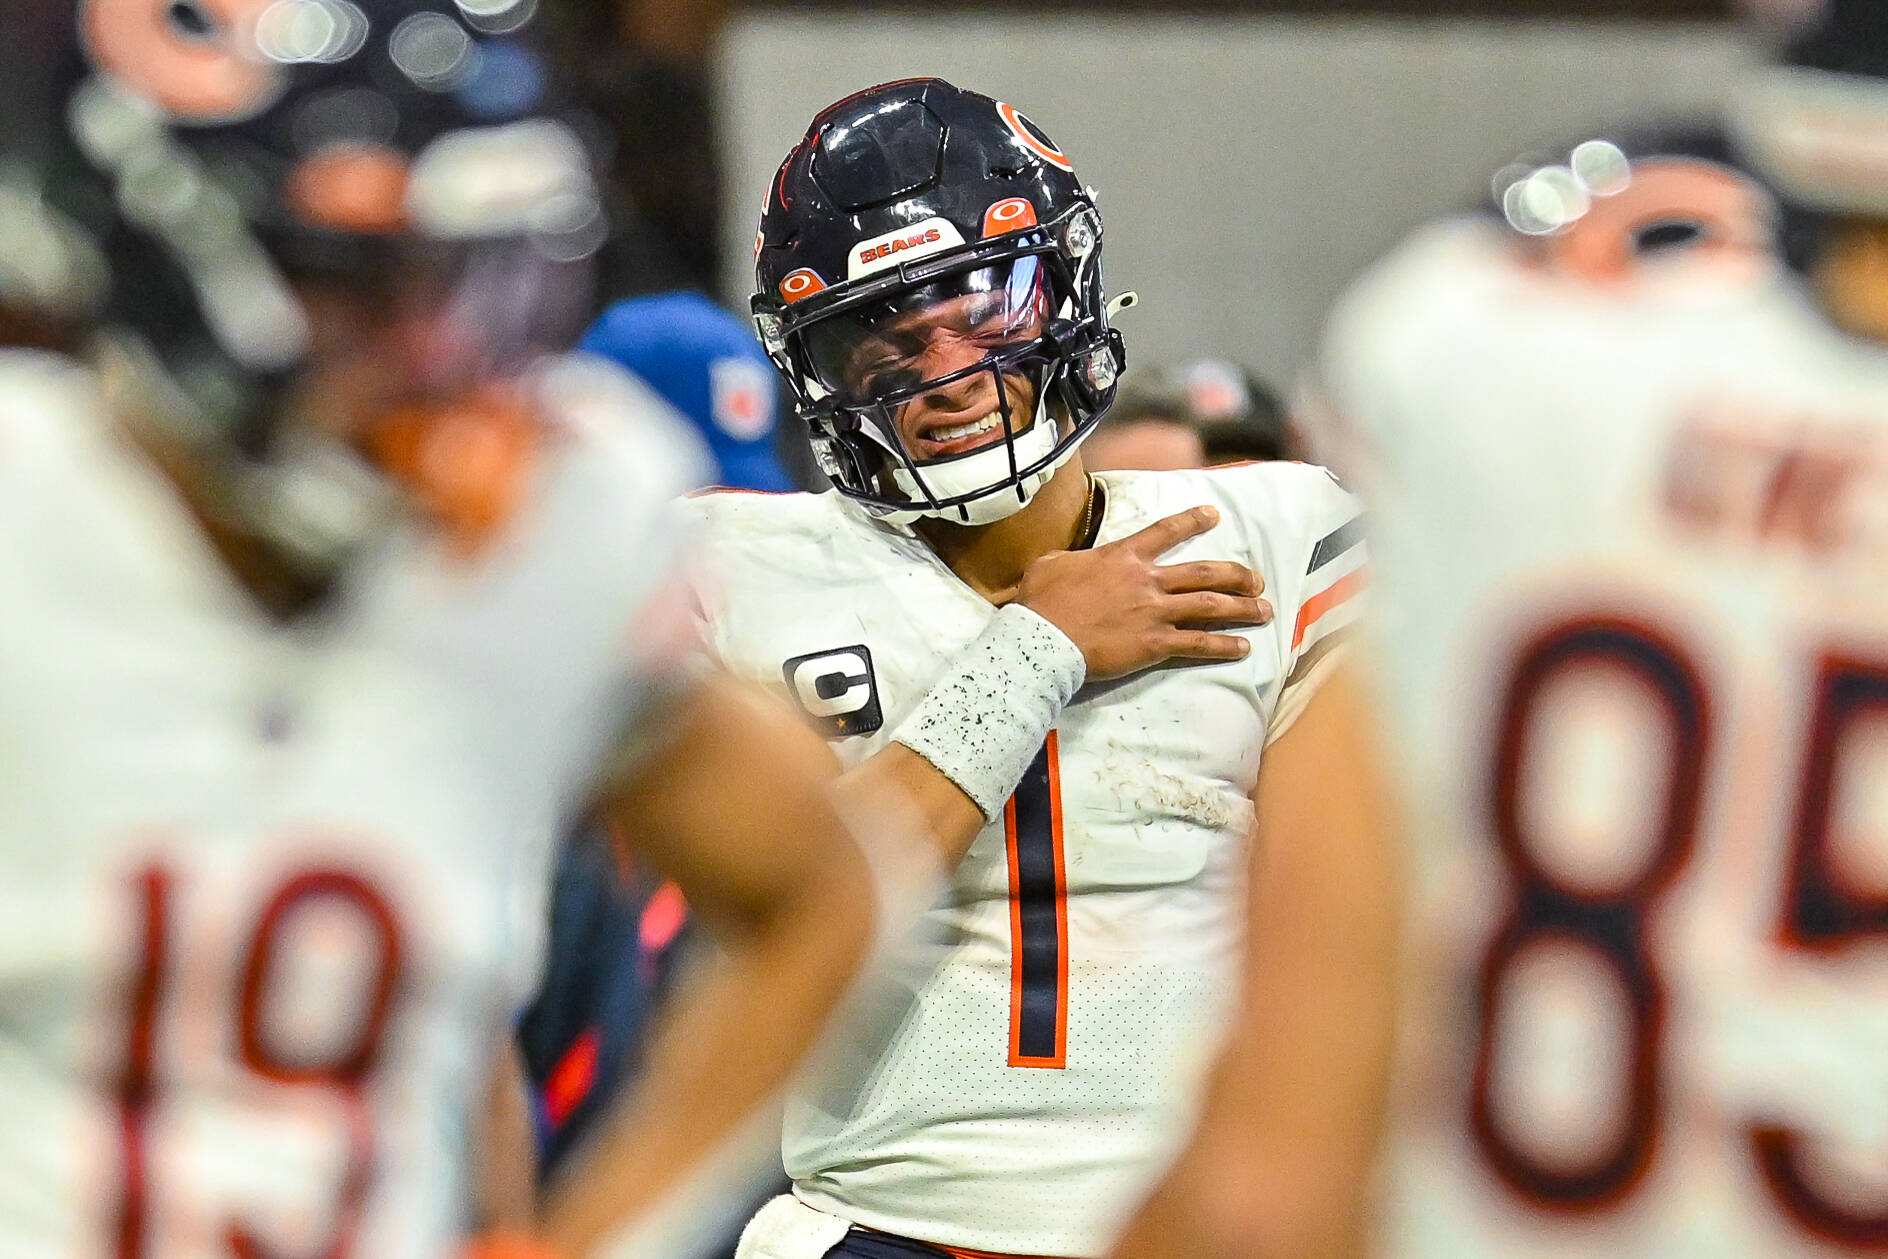 ATLANTA, GA NOVEMBER 20: Chicago quarterback Justin Fields 1 reacts after injuring his shoulder during the NFL, American Football Herren, USA game between the Chicago Bears and the Atlanta Falcons on November 20th, 2022 at Mercedes-Benz Stadium in Atlanta, GA. Photo by Rich von Biberstein/Icon Sportswire NFL: NOV 20 Bears at Falcons Icon221120107